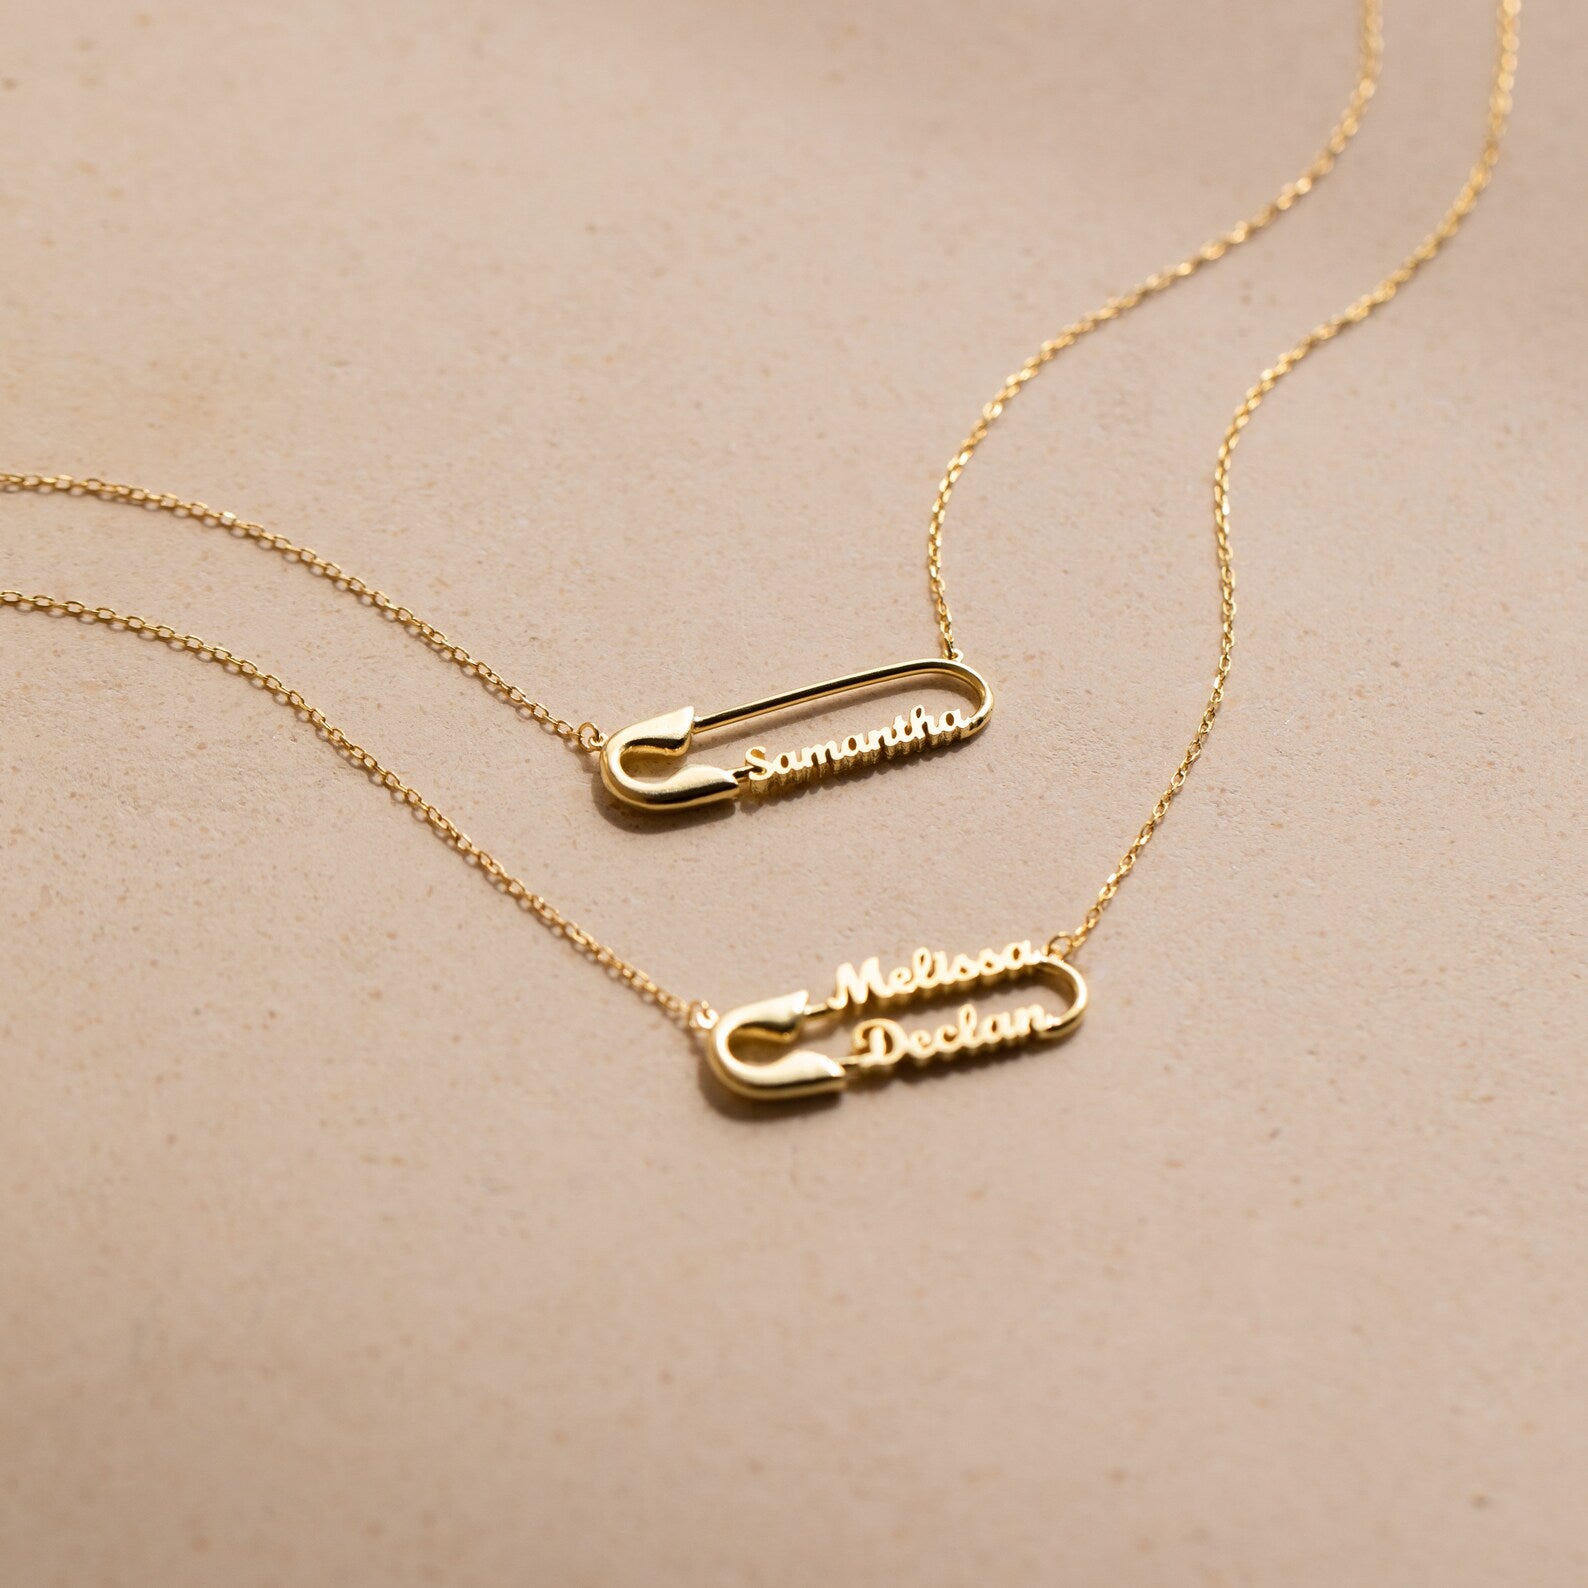 Safety Pin Name Necklace